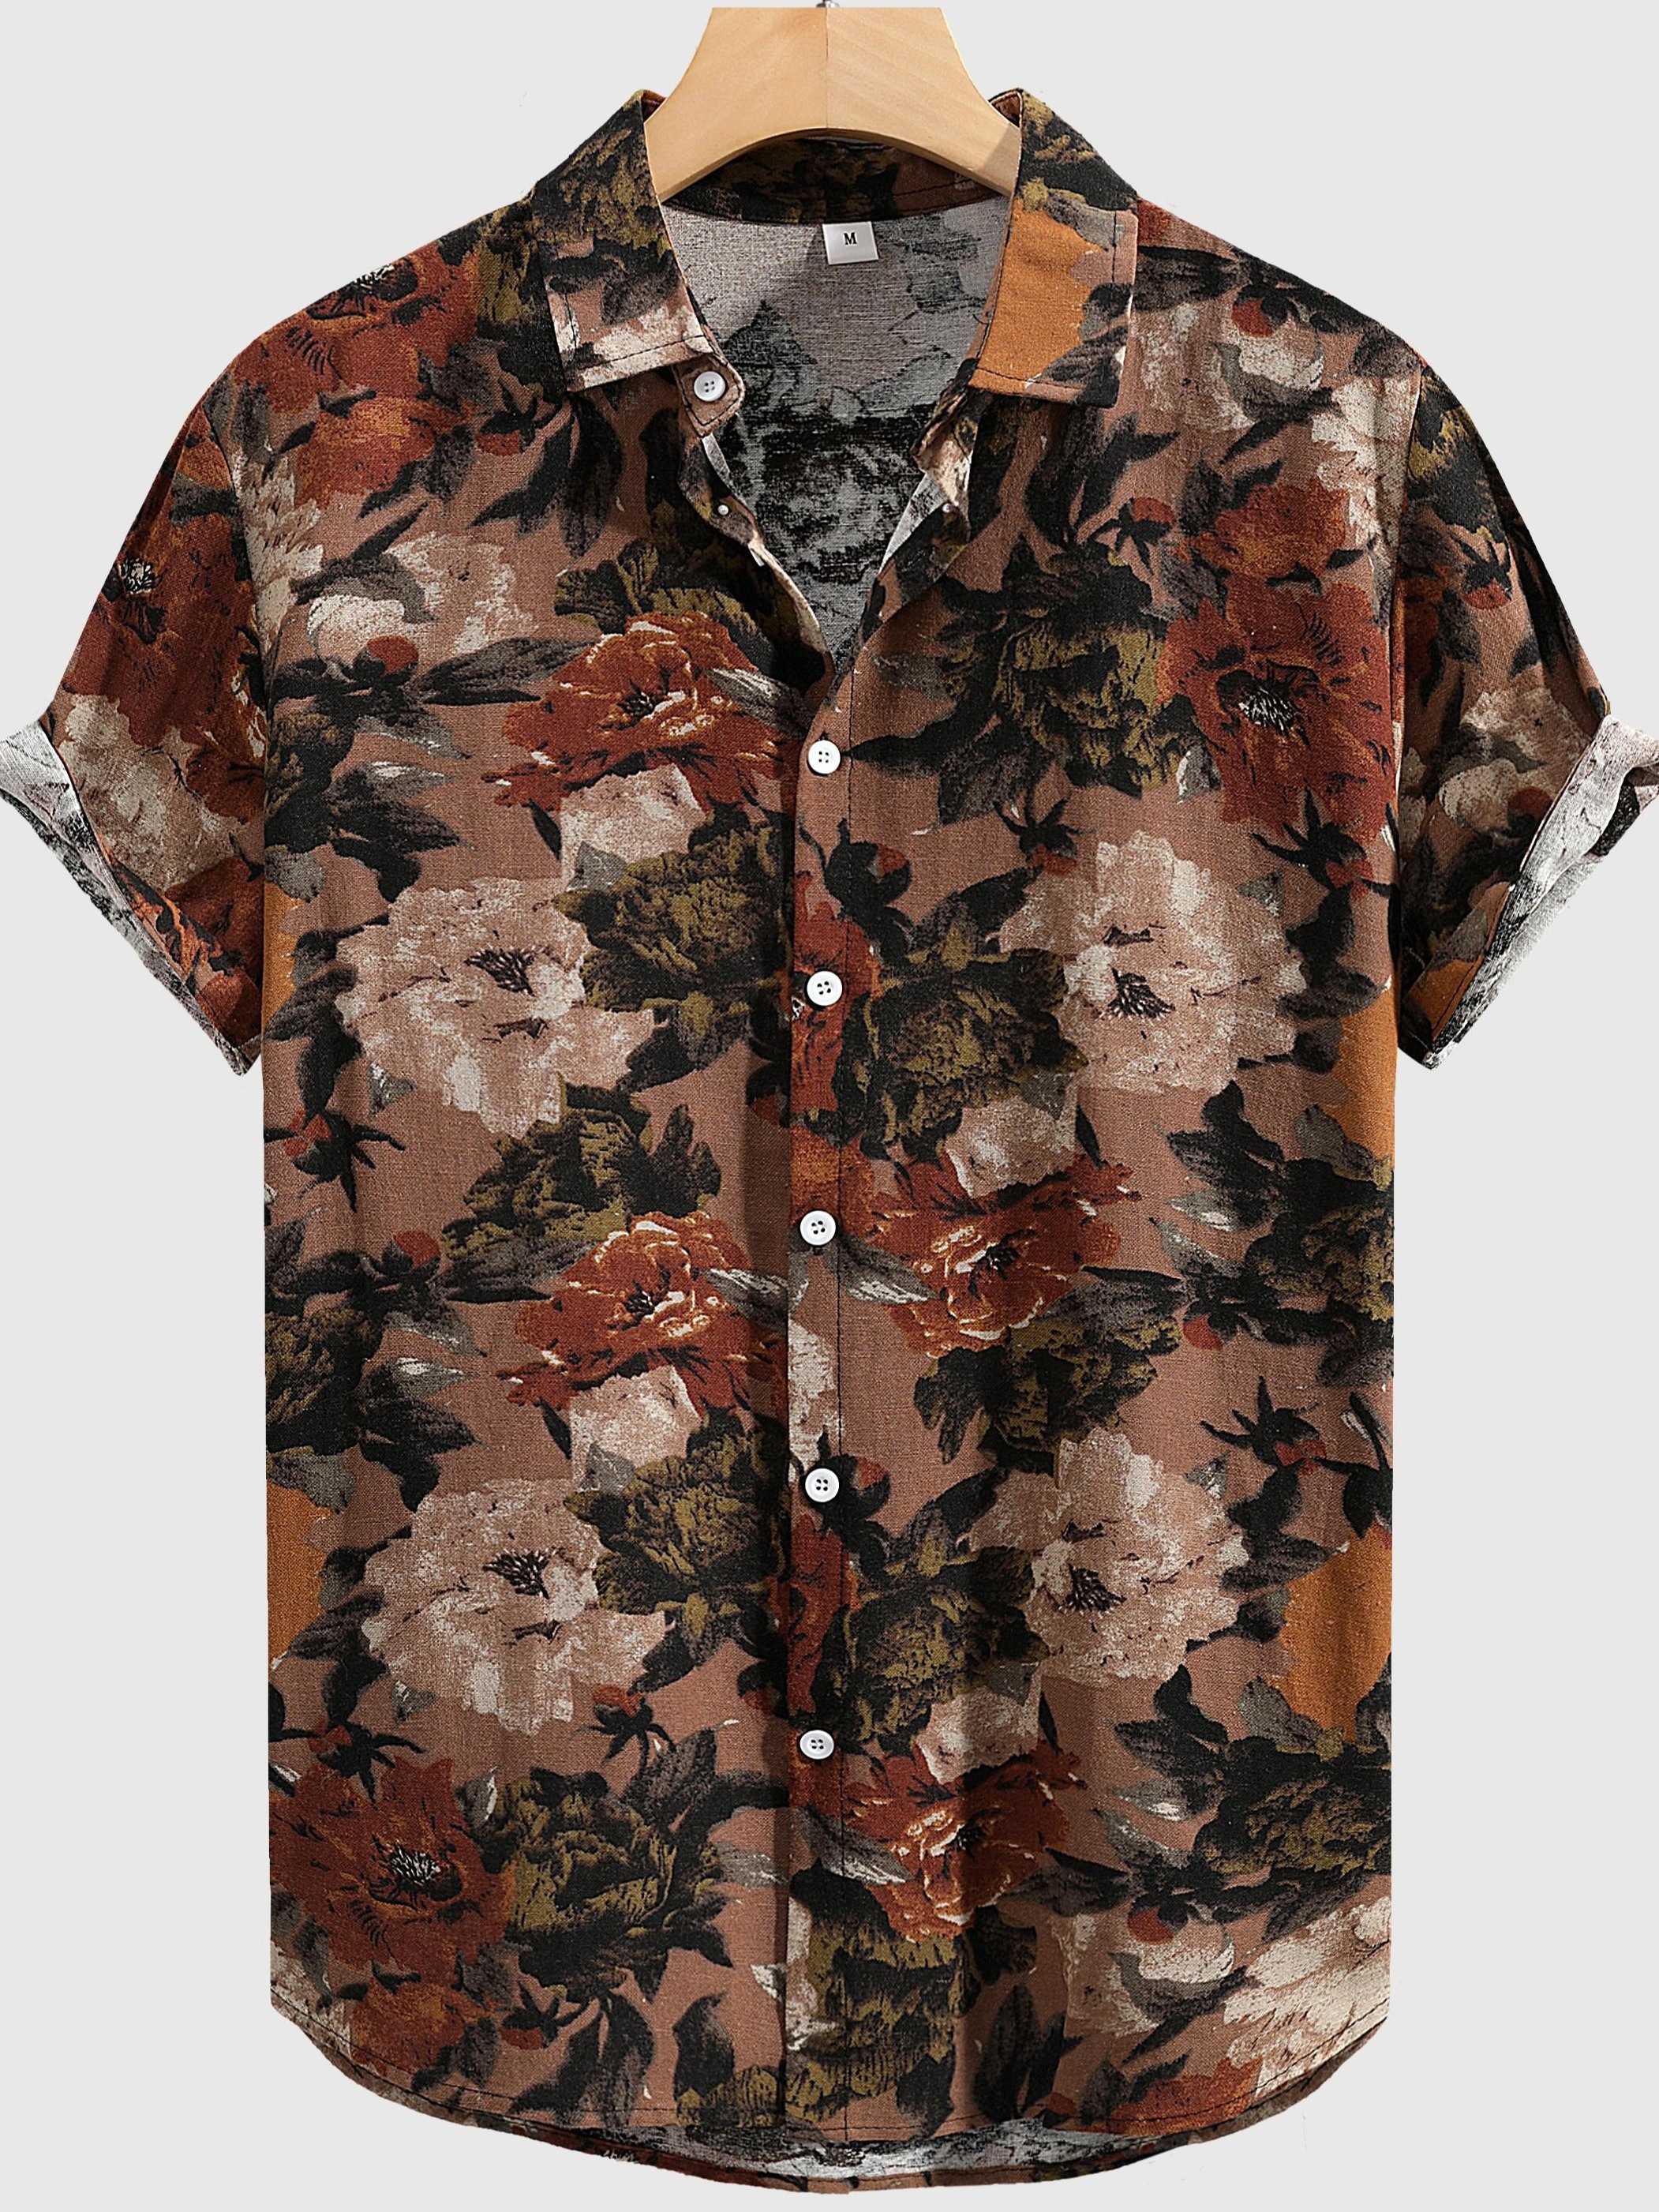 mens stylish loose cotton blend floral print shirt casual breathable lapel button up short sleeve shirt for summer outdoor activities details 0